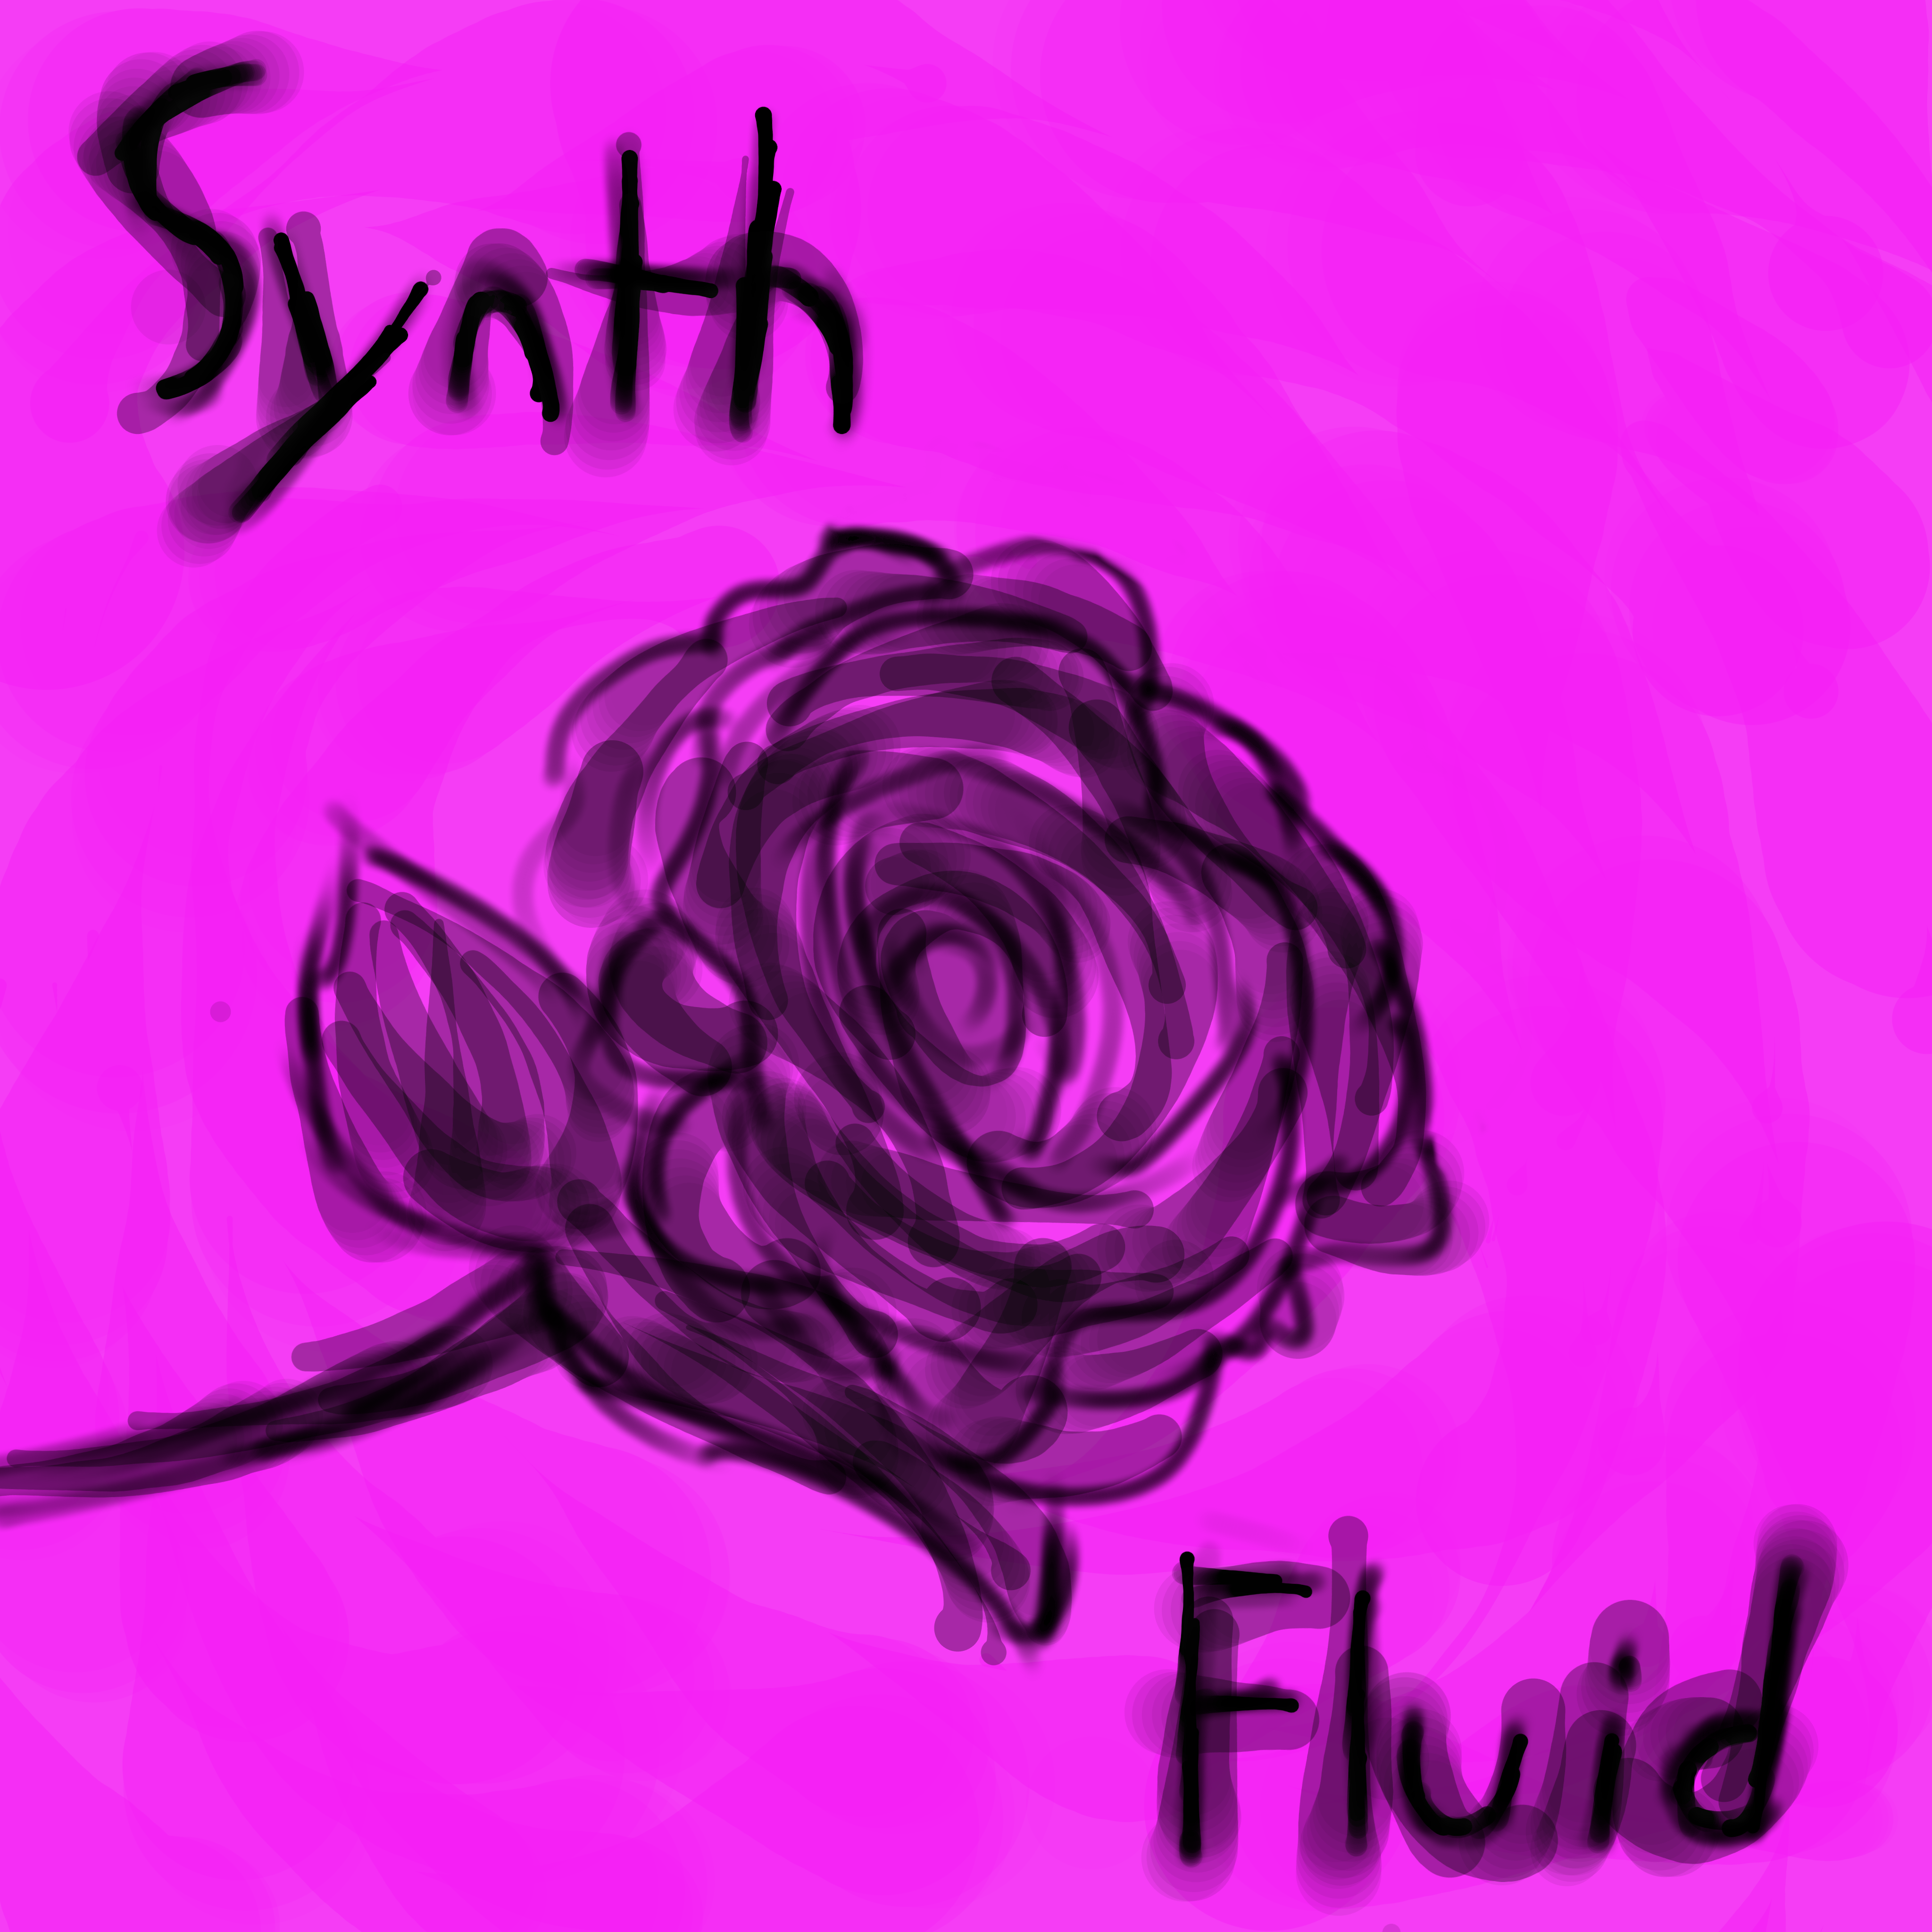 A digitally sketched and inked black rose, in between the text, "Synth Fluid." The background is a digitally pained pink.